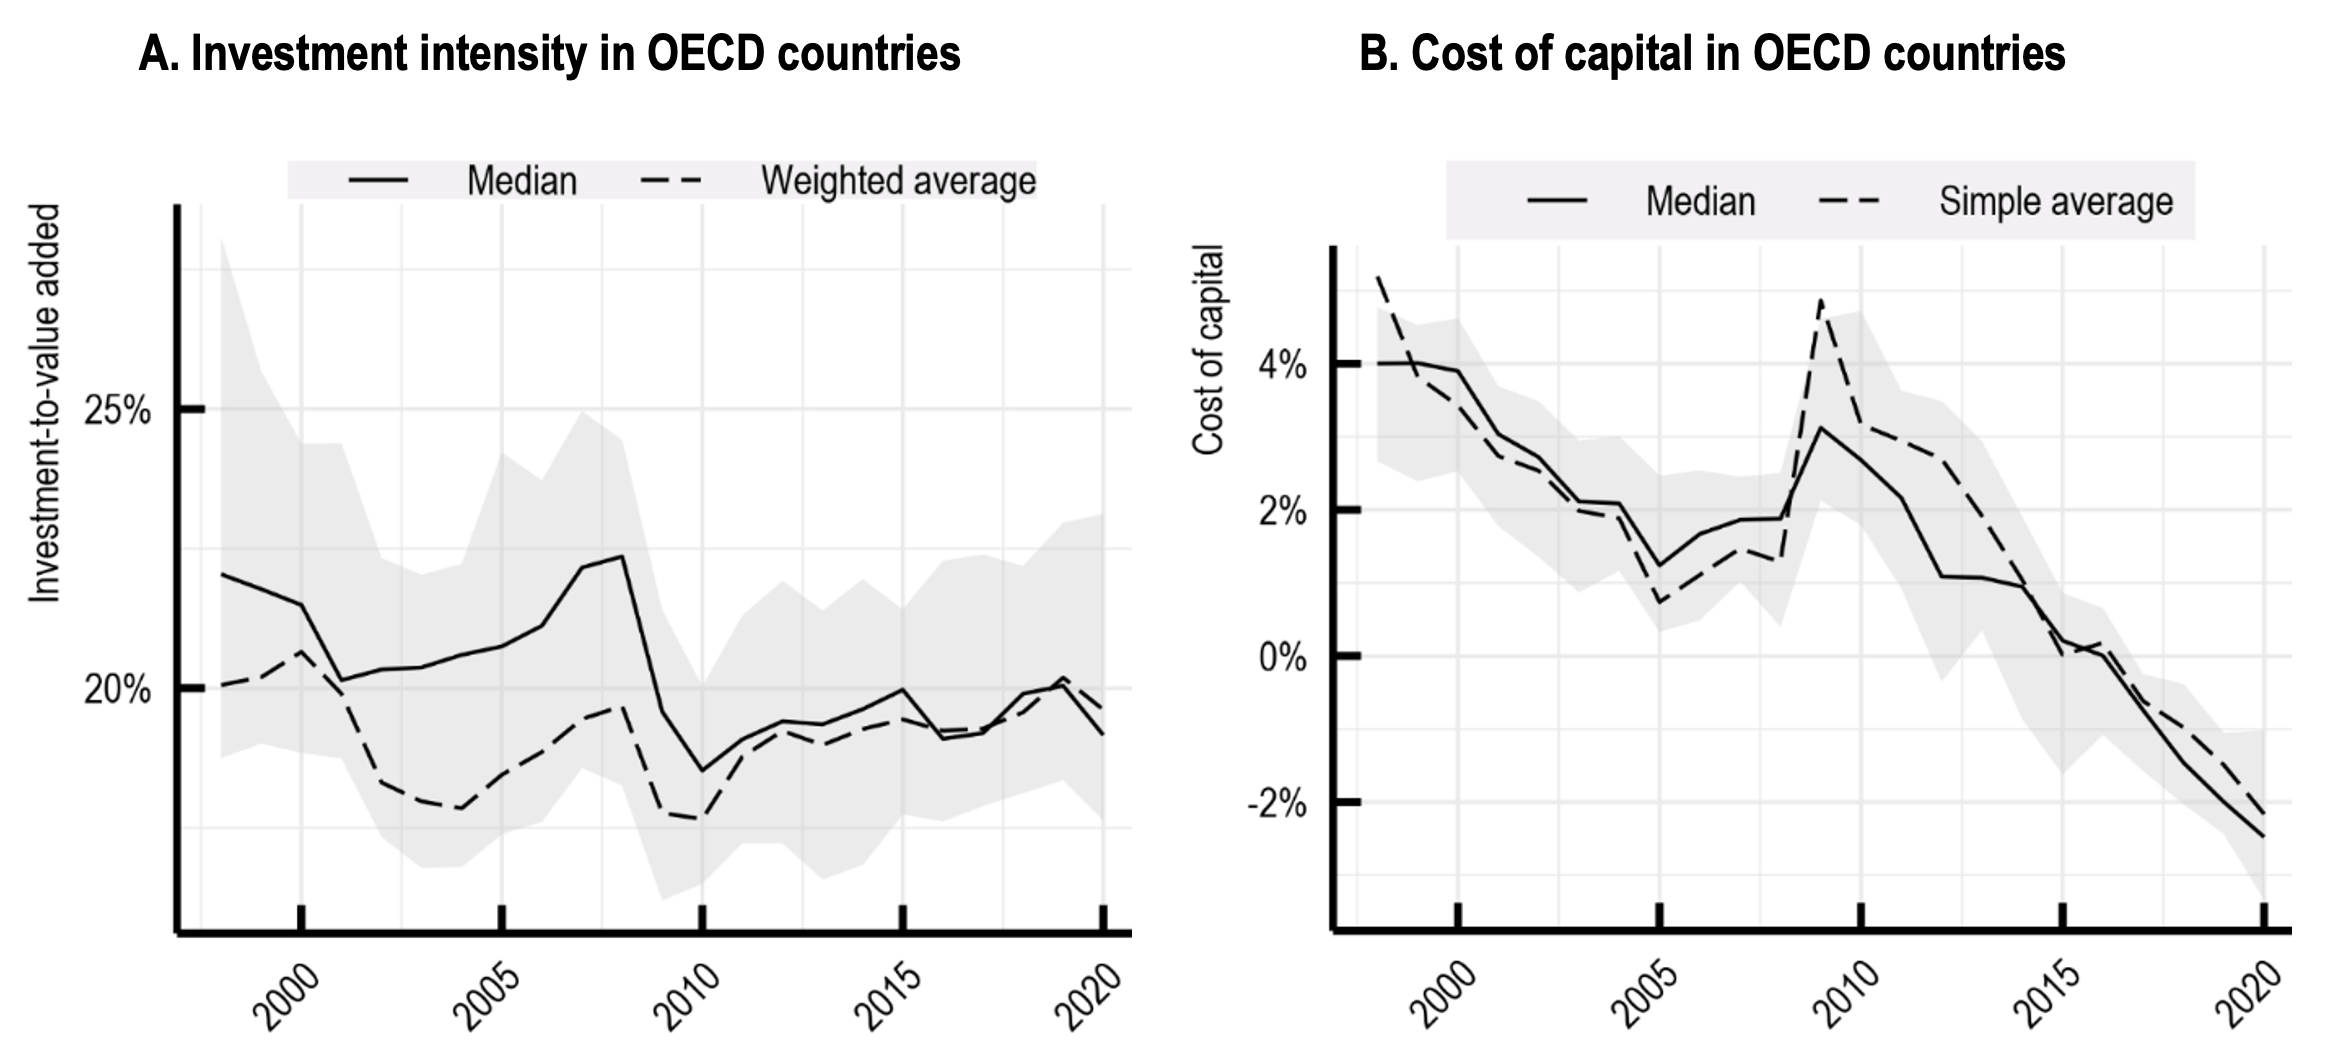 Figure 1 Investment intensity and cost of capital in OECD countries